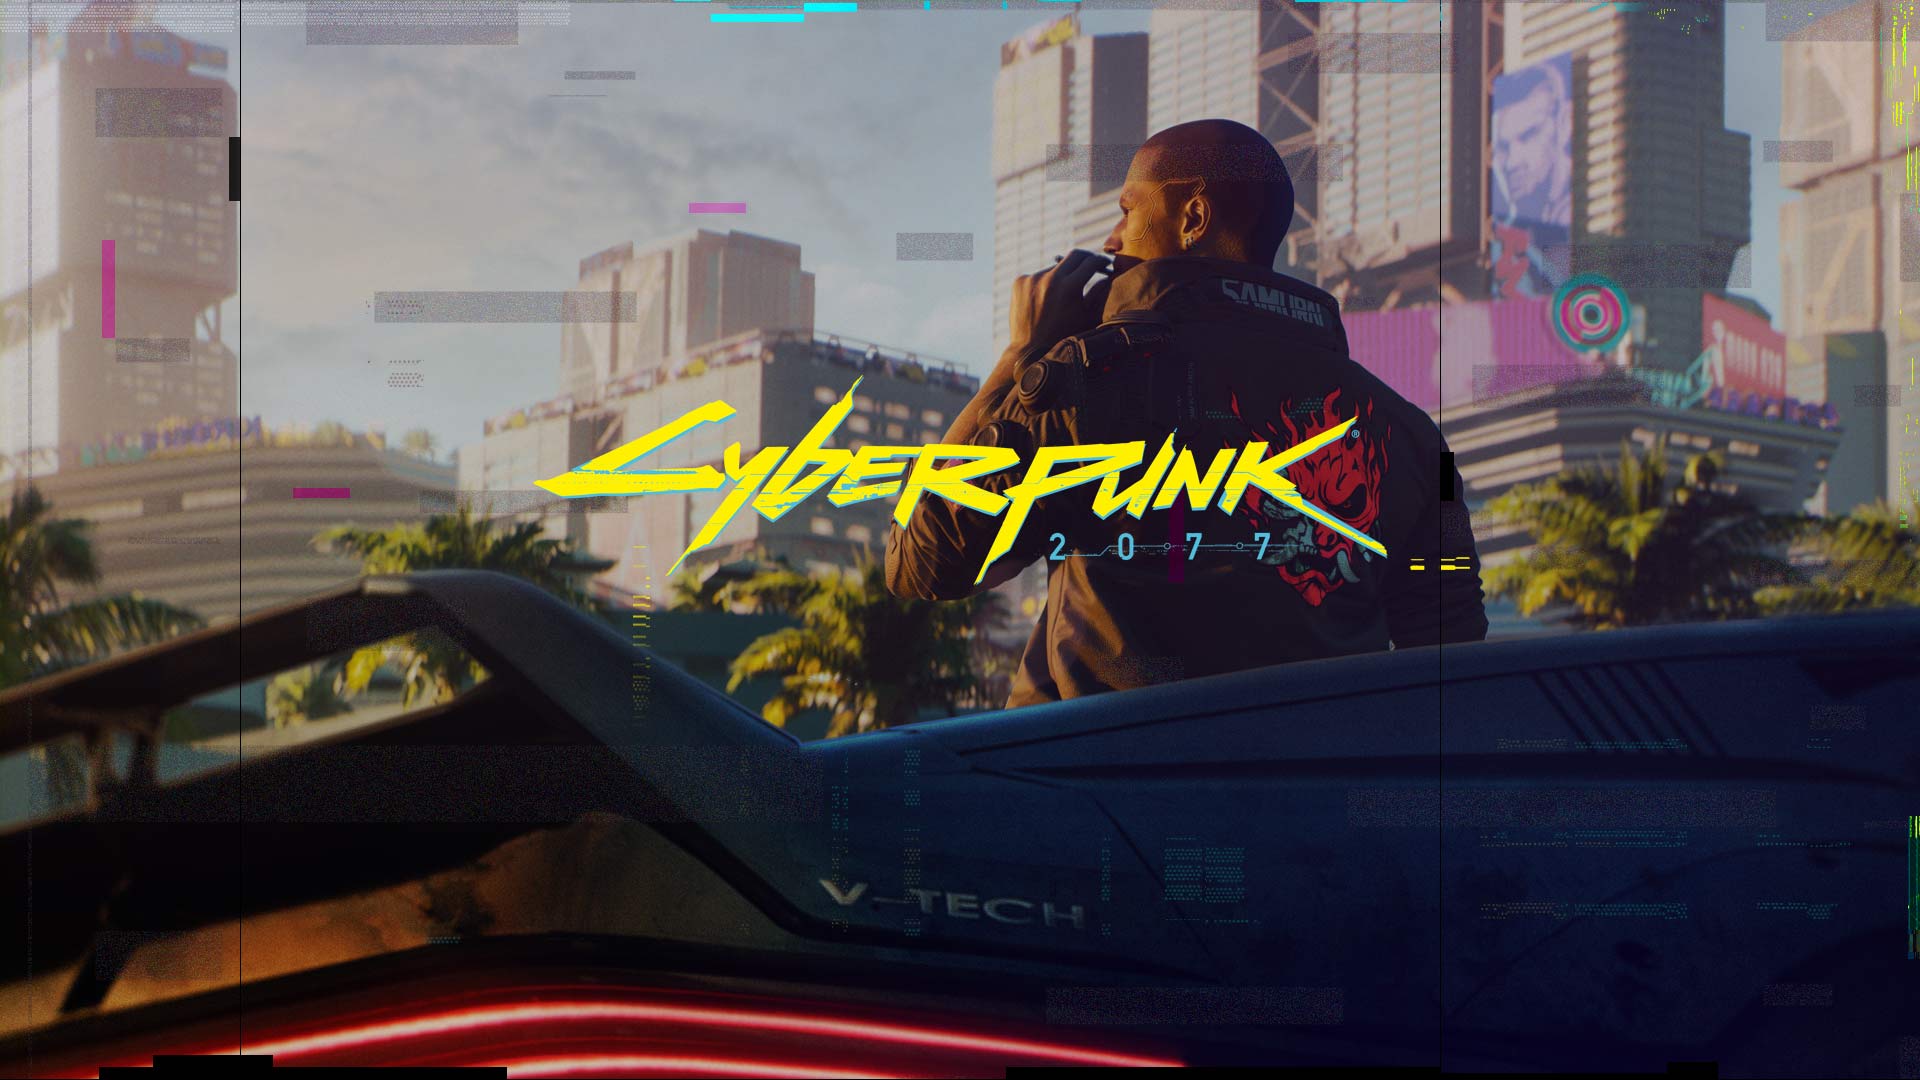 Cyberpunk 2077 release date delayed again, now coming in December